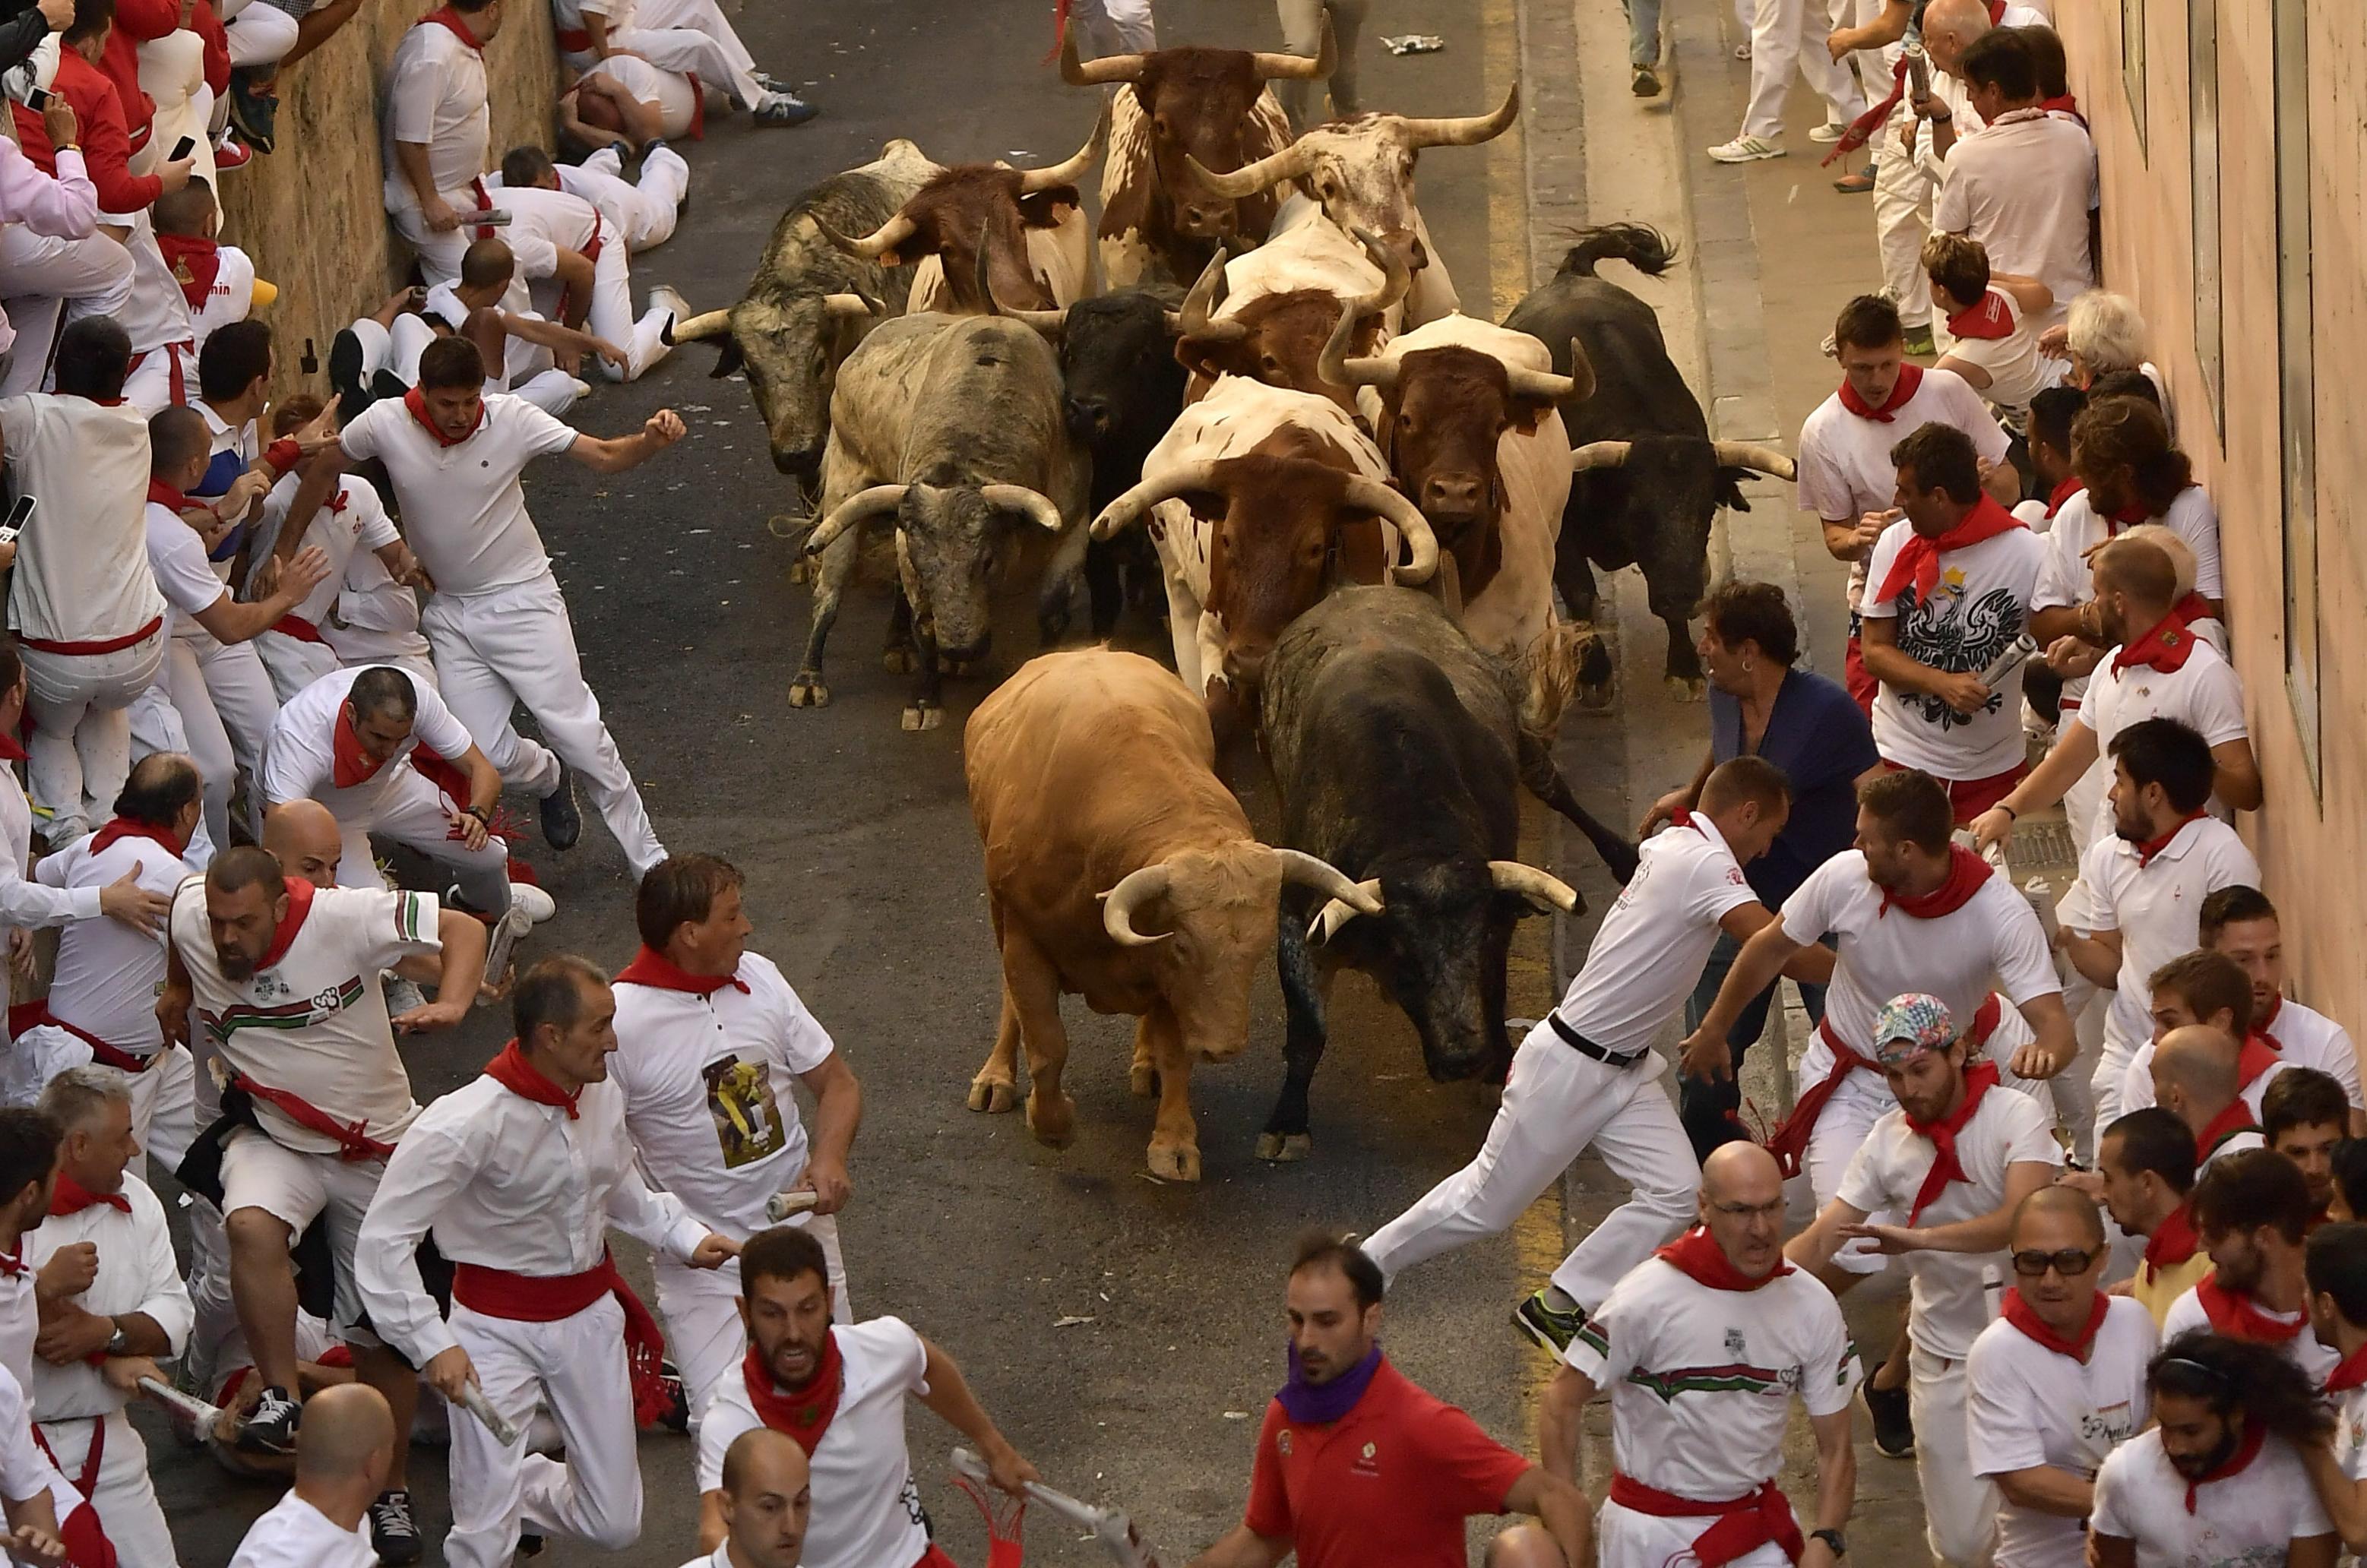 People dressed all in white with red bandanas, capes, and belts jump out of the way of a clump of ten bulls with long curled horns in the street.